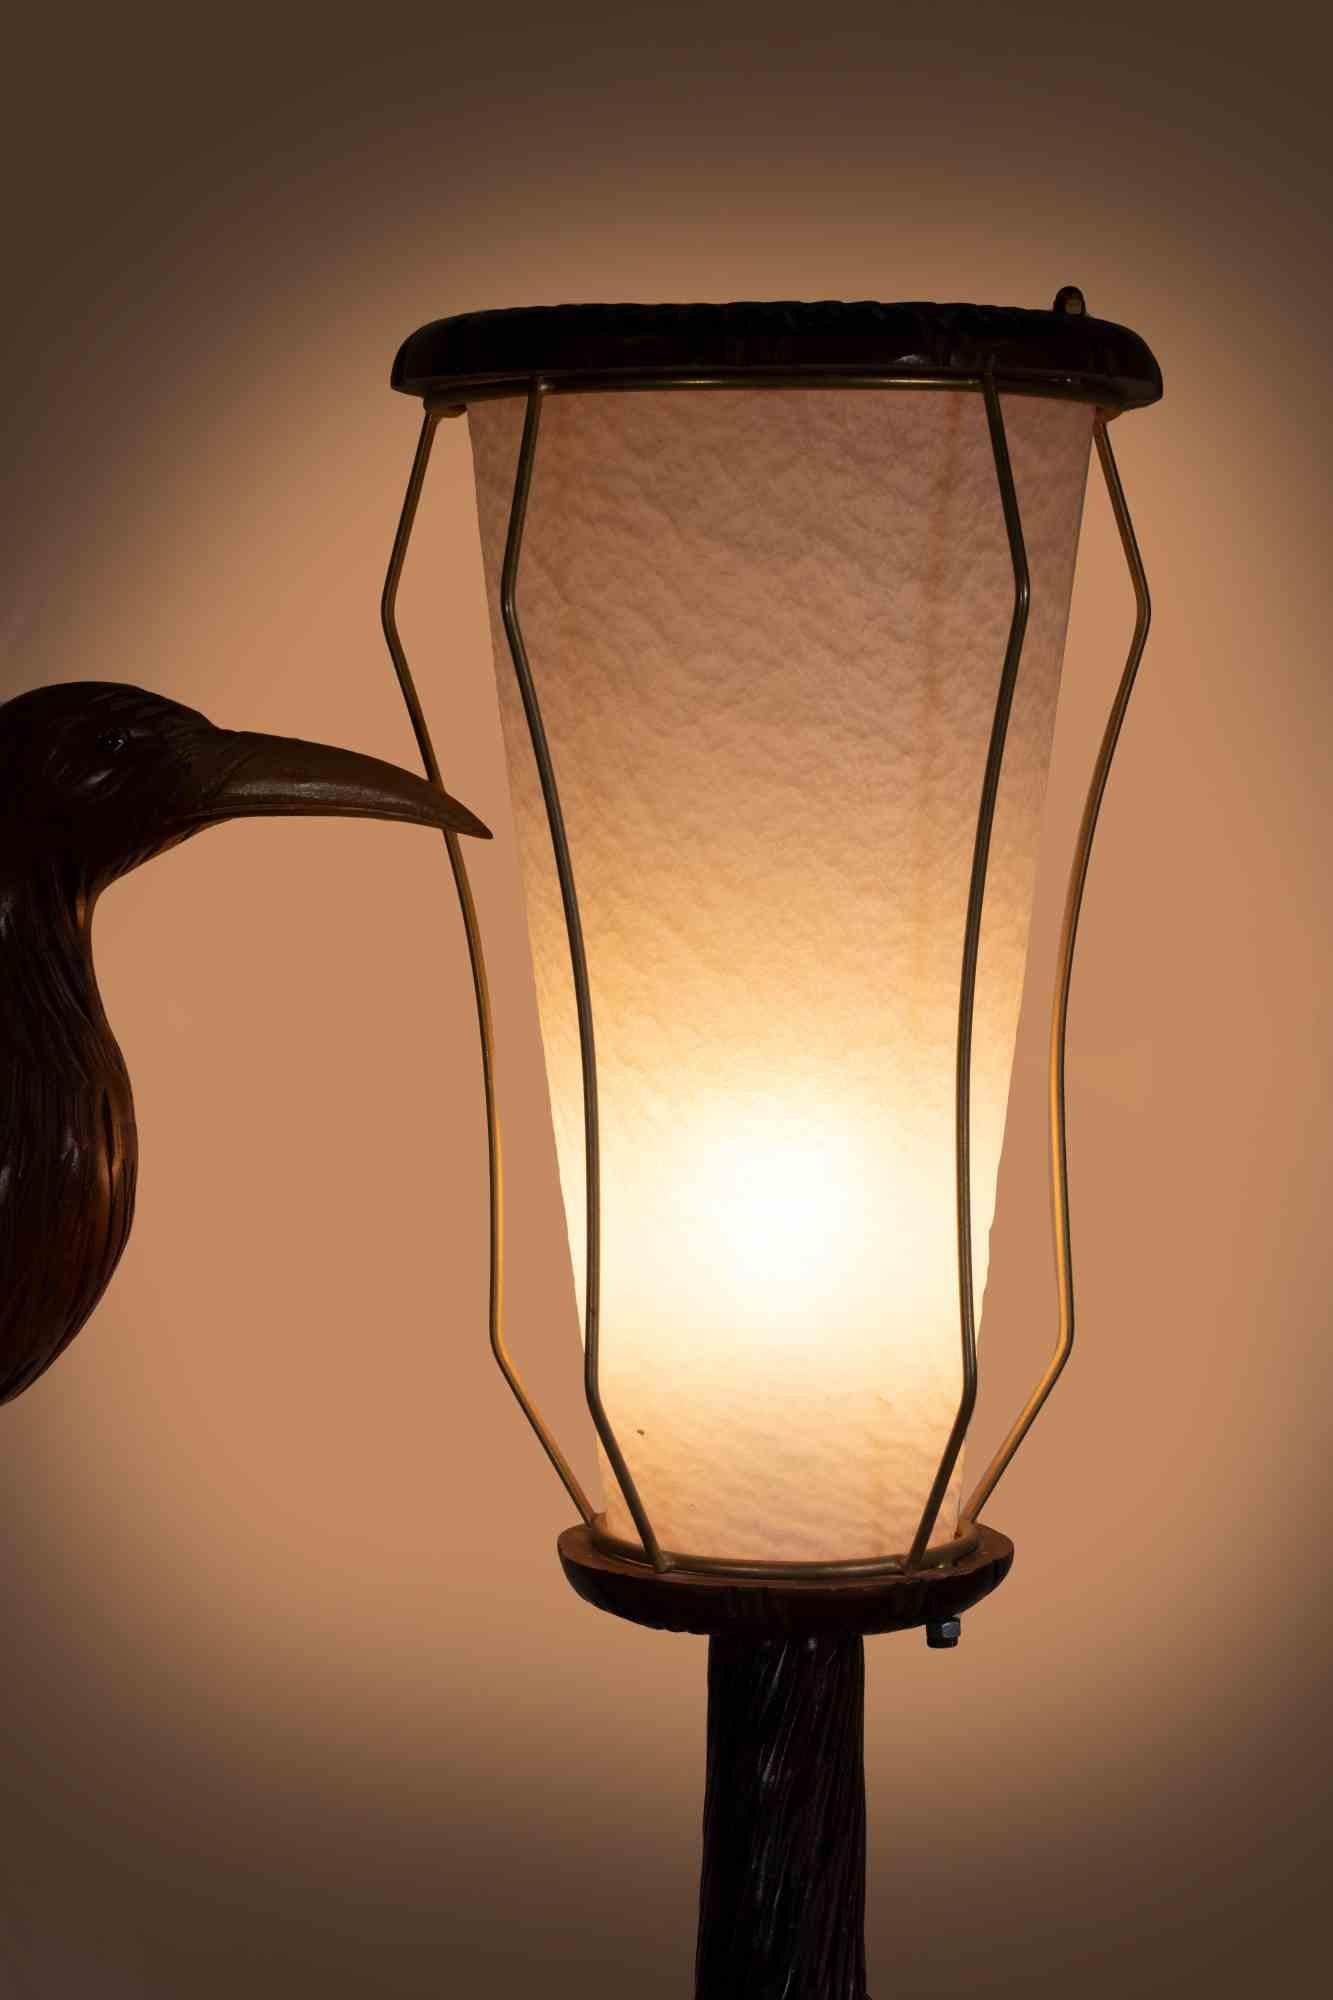 Mid-20th Century Vintage Wooden Lamp with Bird, Italian Lamp by Aldo Tura, Italy, 1950s For Sale